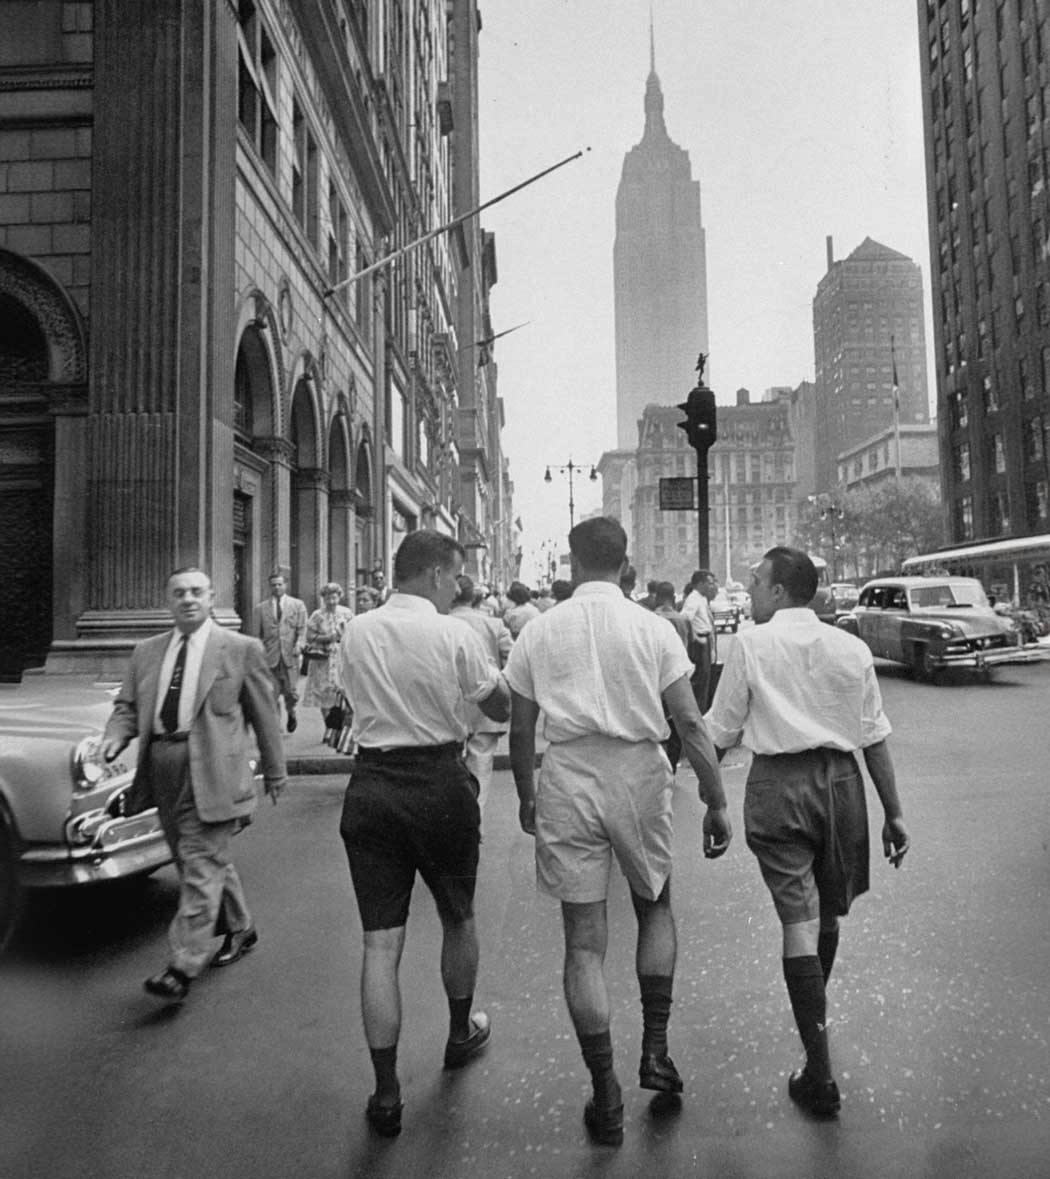 three-new-yorkers-turn-heads-during-a-hot-summer-day-in-manhattan-july-1953